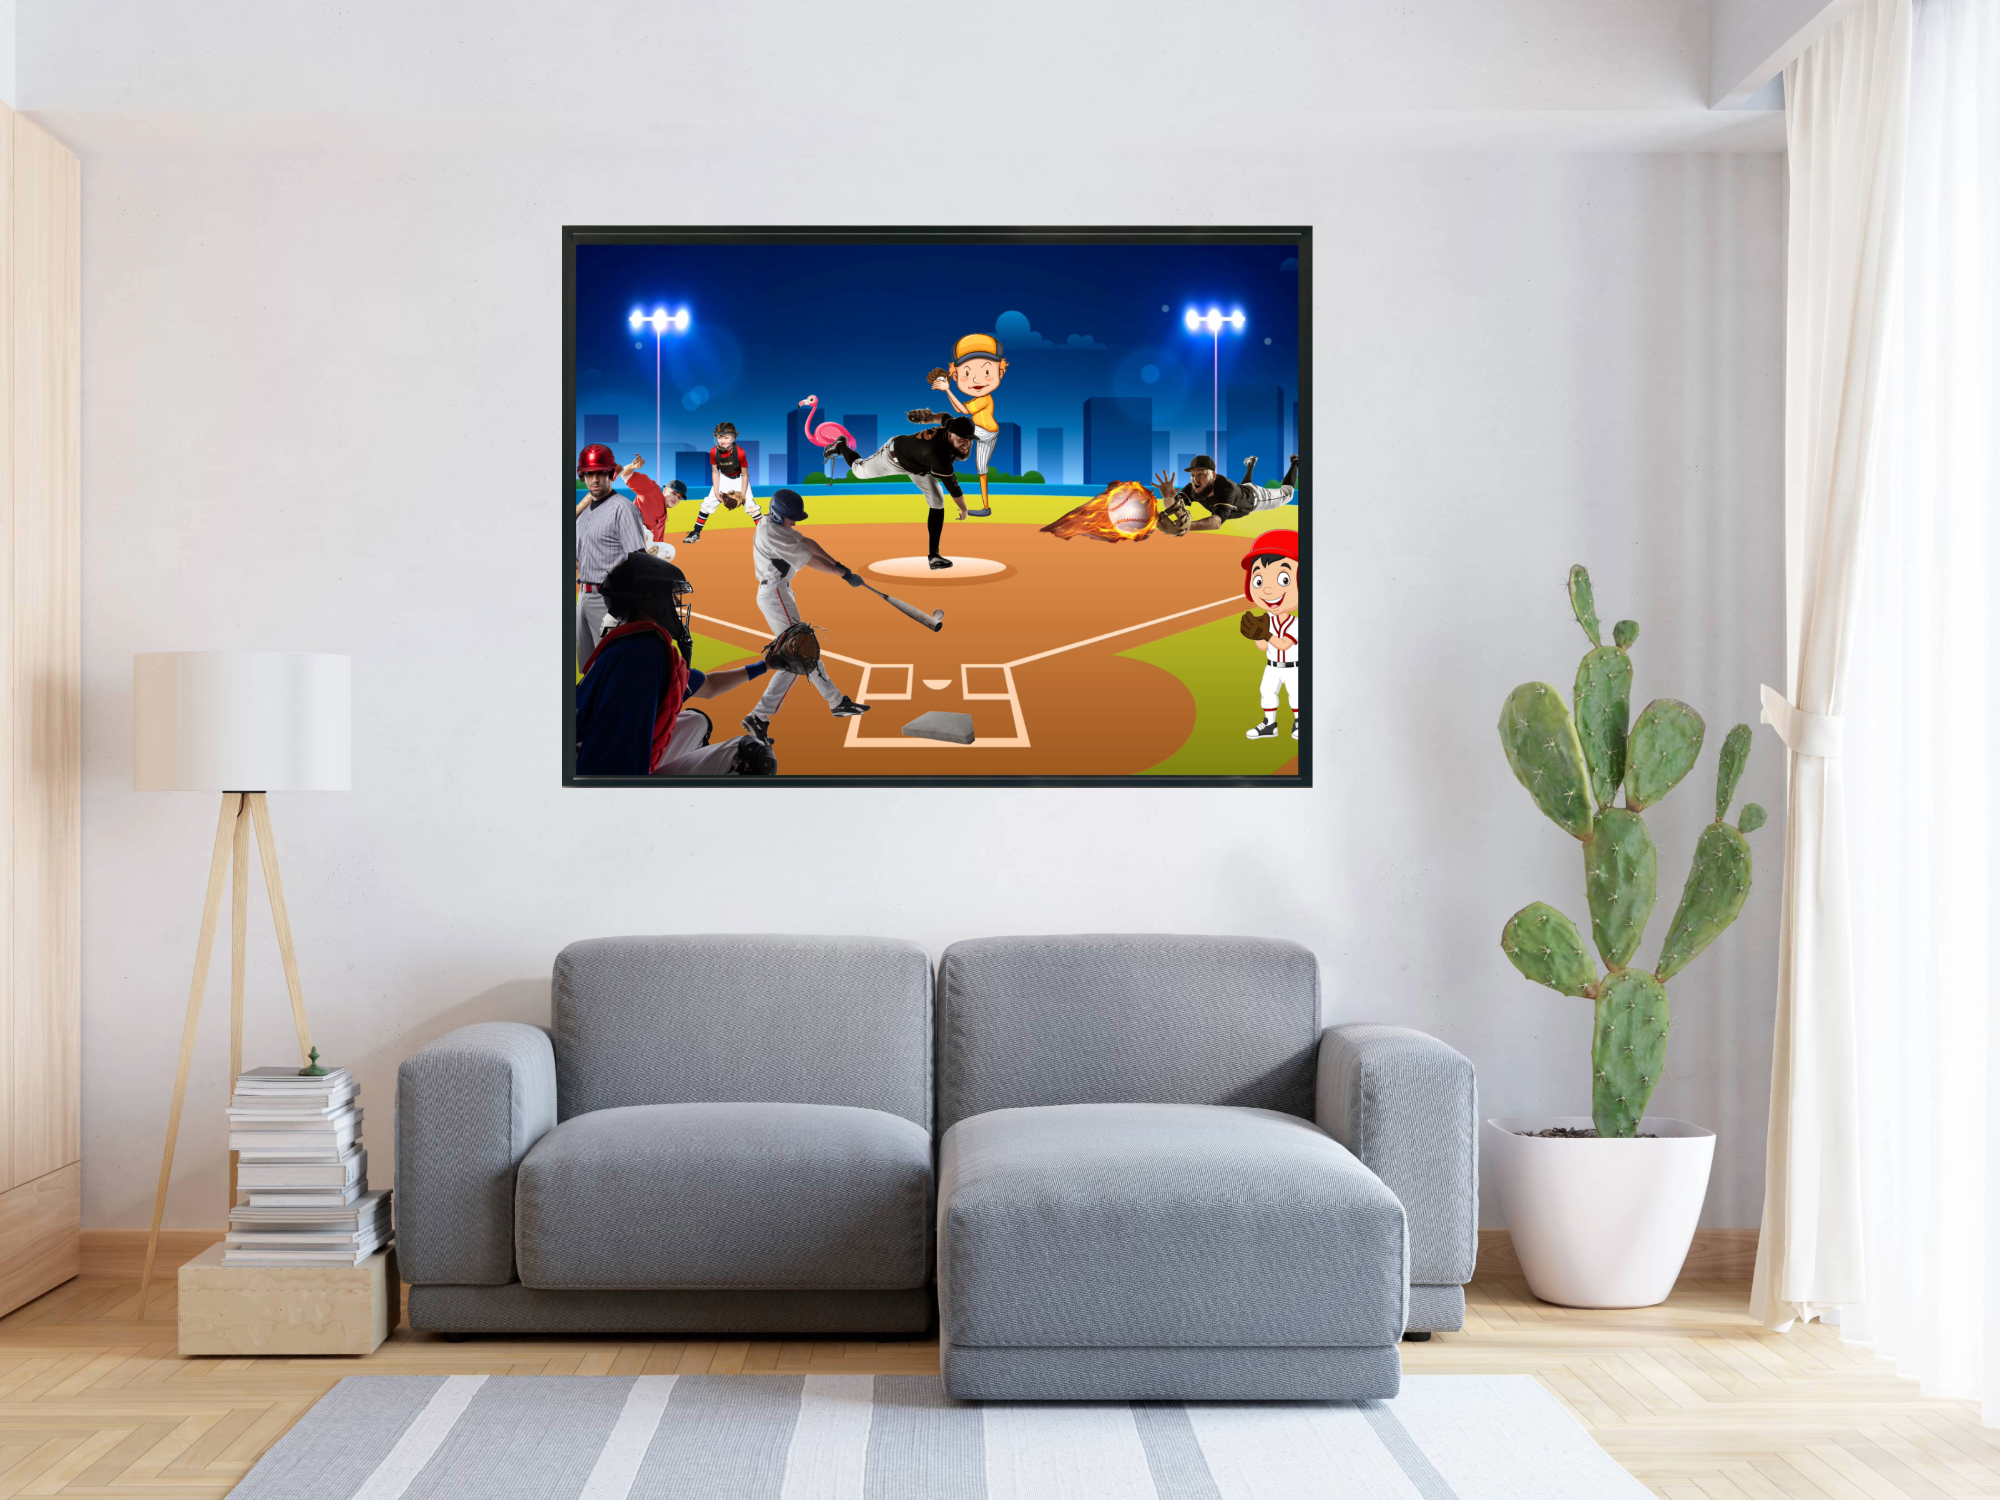 Wall Art BASEBALL SPORTS Collection Canvas Print Painting Original Giclee + Frame Love Nice Beauty Fun Design Fit House Home Office Gift Ready Hang